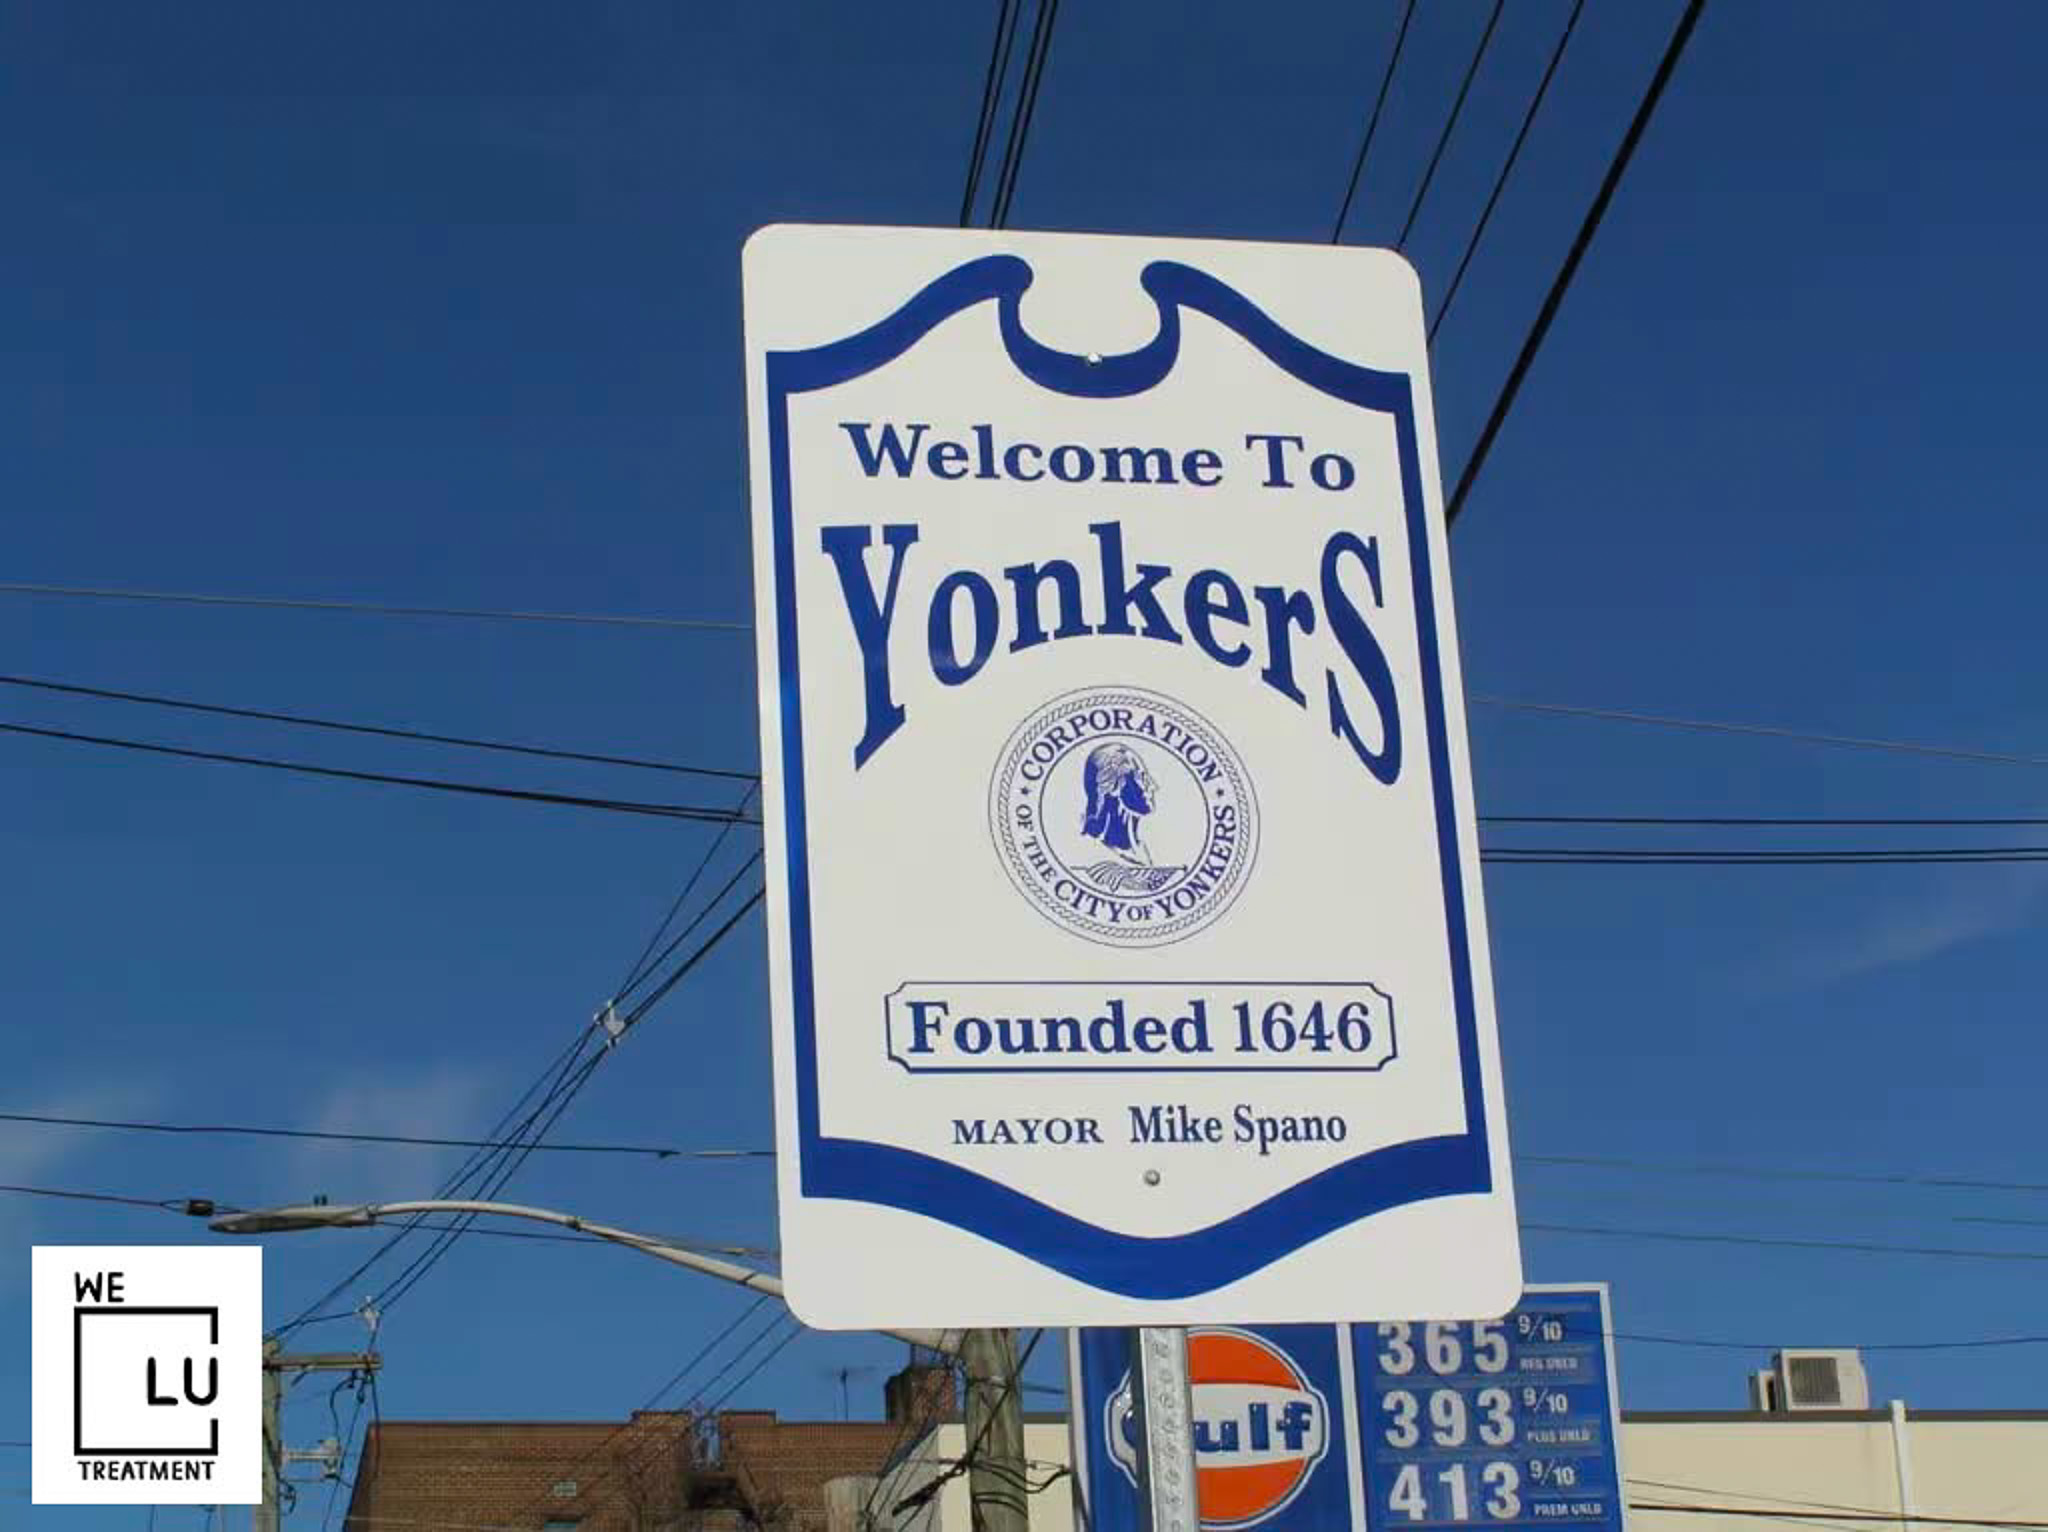 Yonkers NY We Level Up treatment center for drug and alcohol rehab detox and mental health services - Image 1